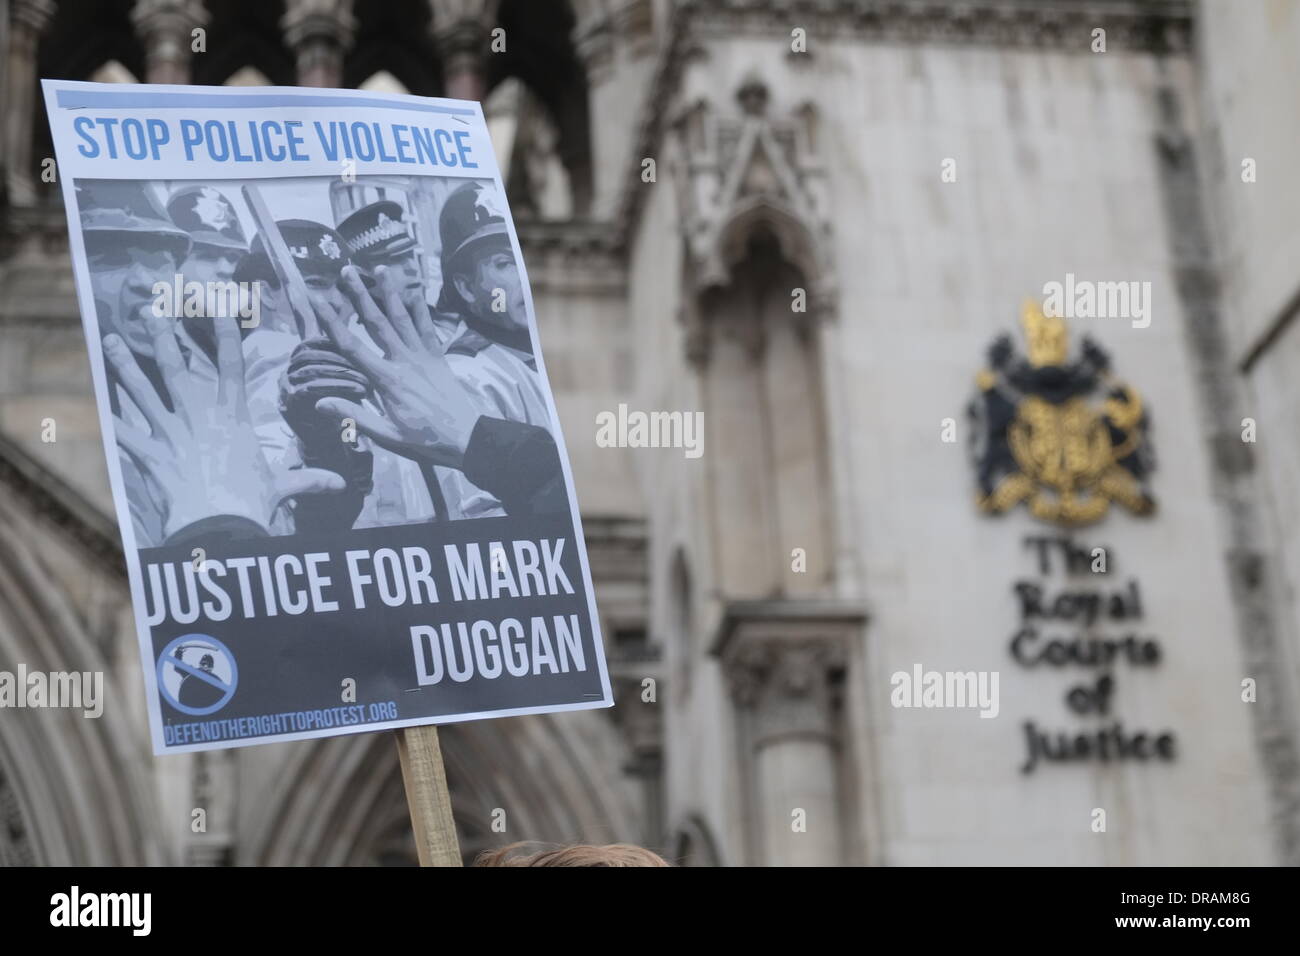 Protest Duggan High Resolution Stock Photography and Images - Alamy